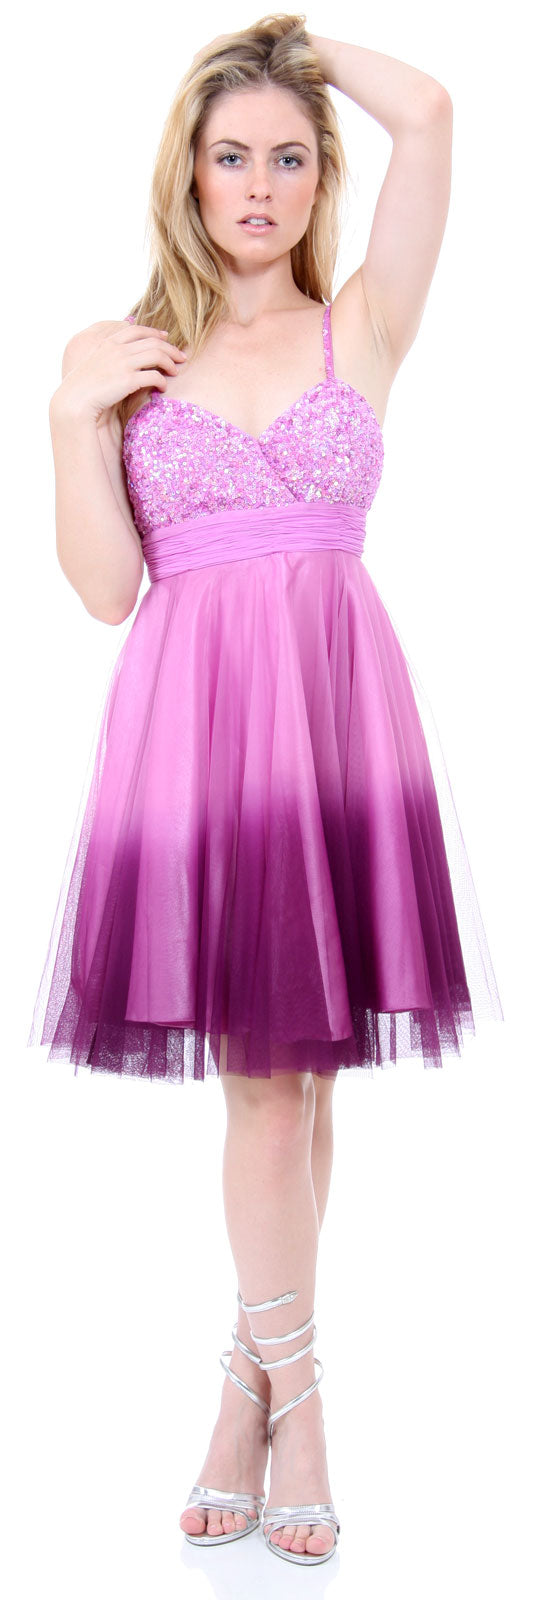 Image of Spaghetti Straps 2 Tone Beaded Bust Short Formal Party Dress in Lilac